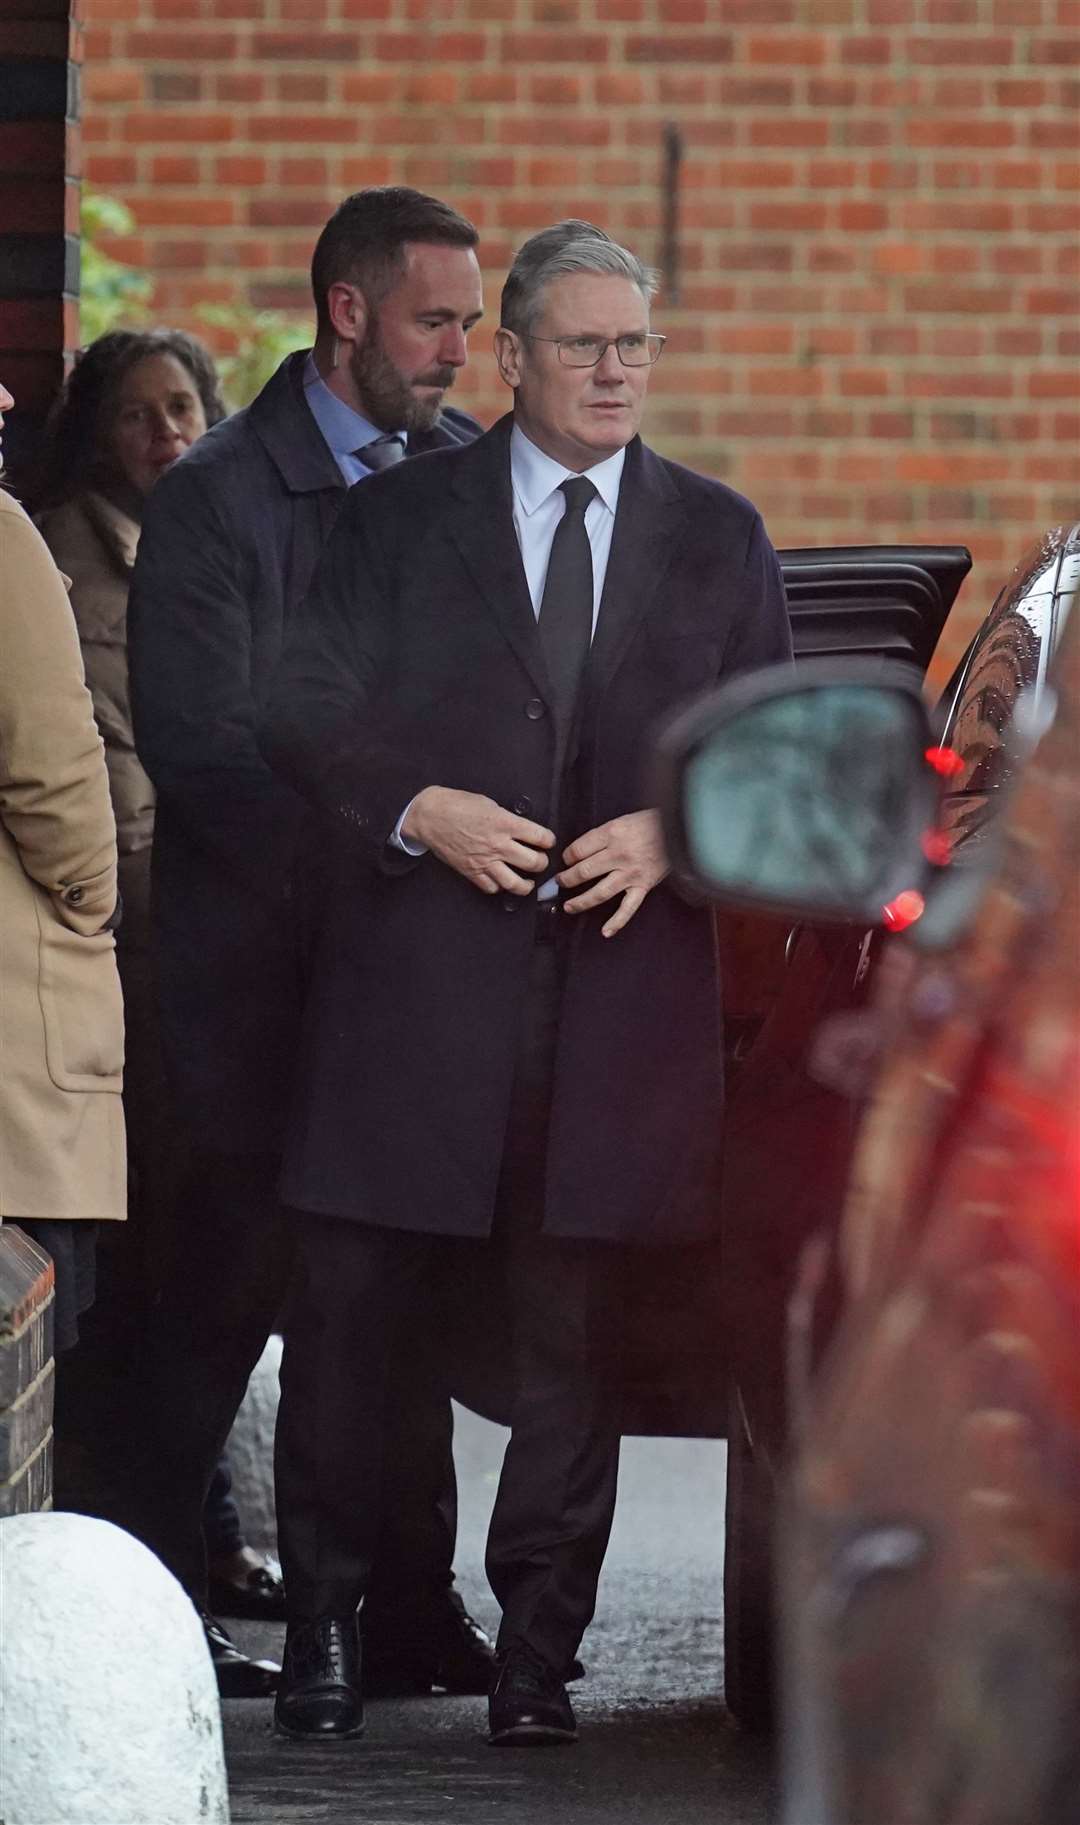 Labour leader Sir Keir Starmer arrives for the funeral service (Stefan Rousseau/PA)